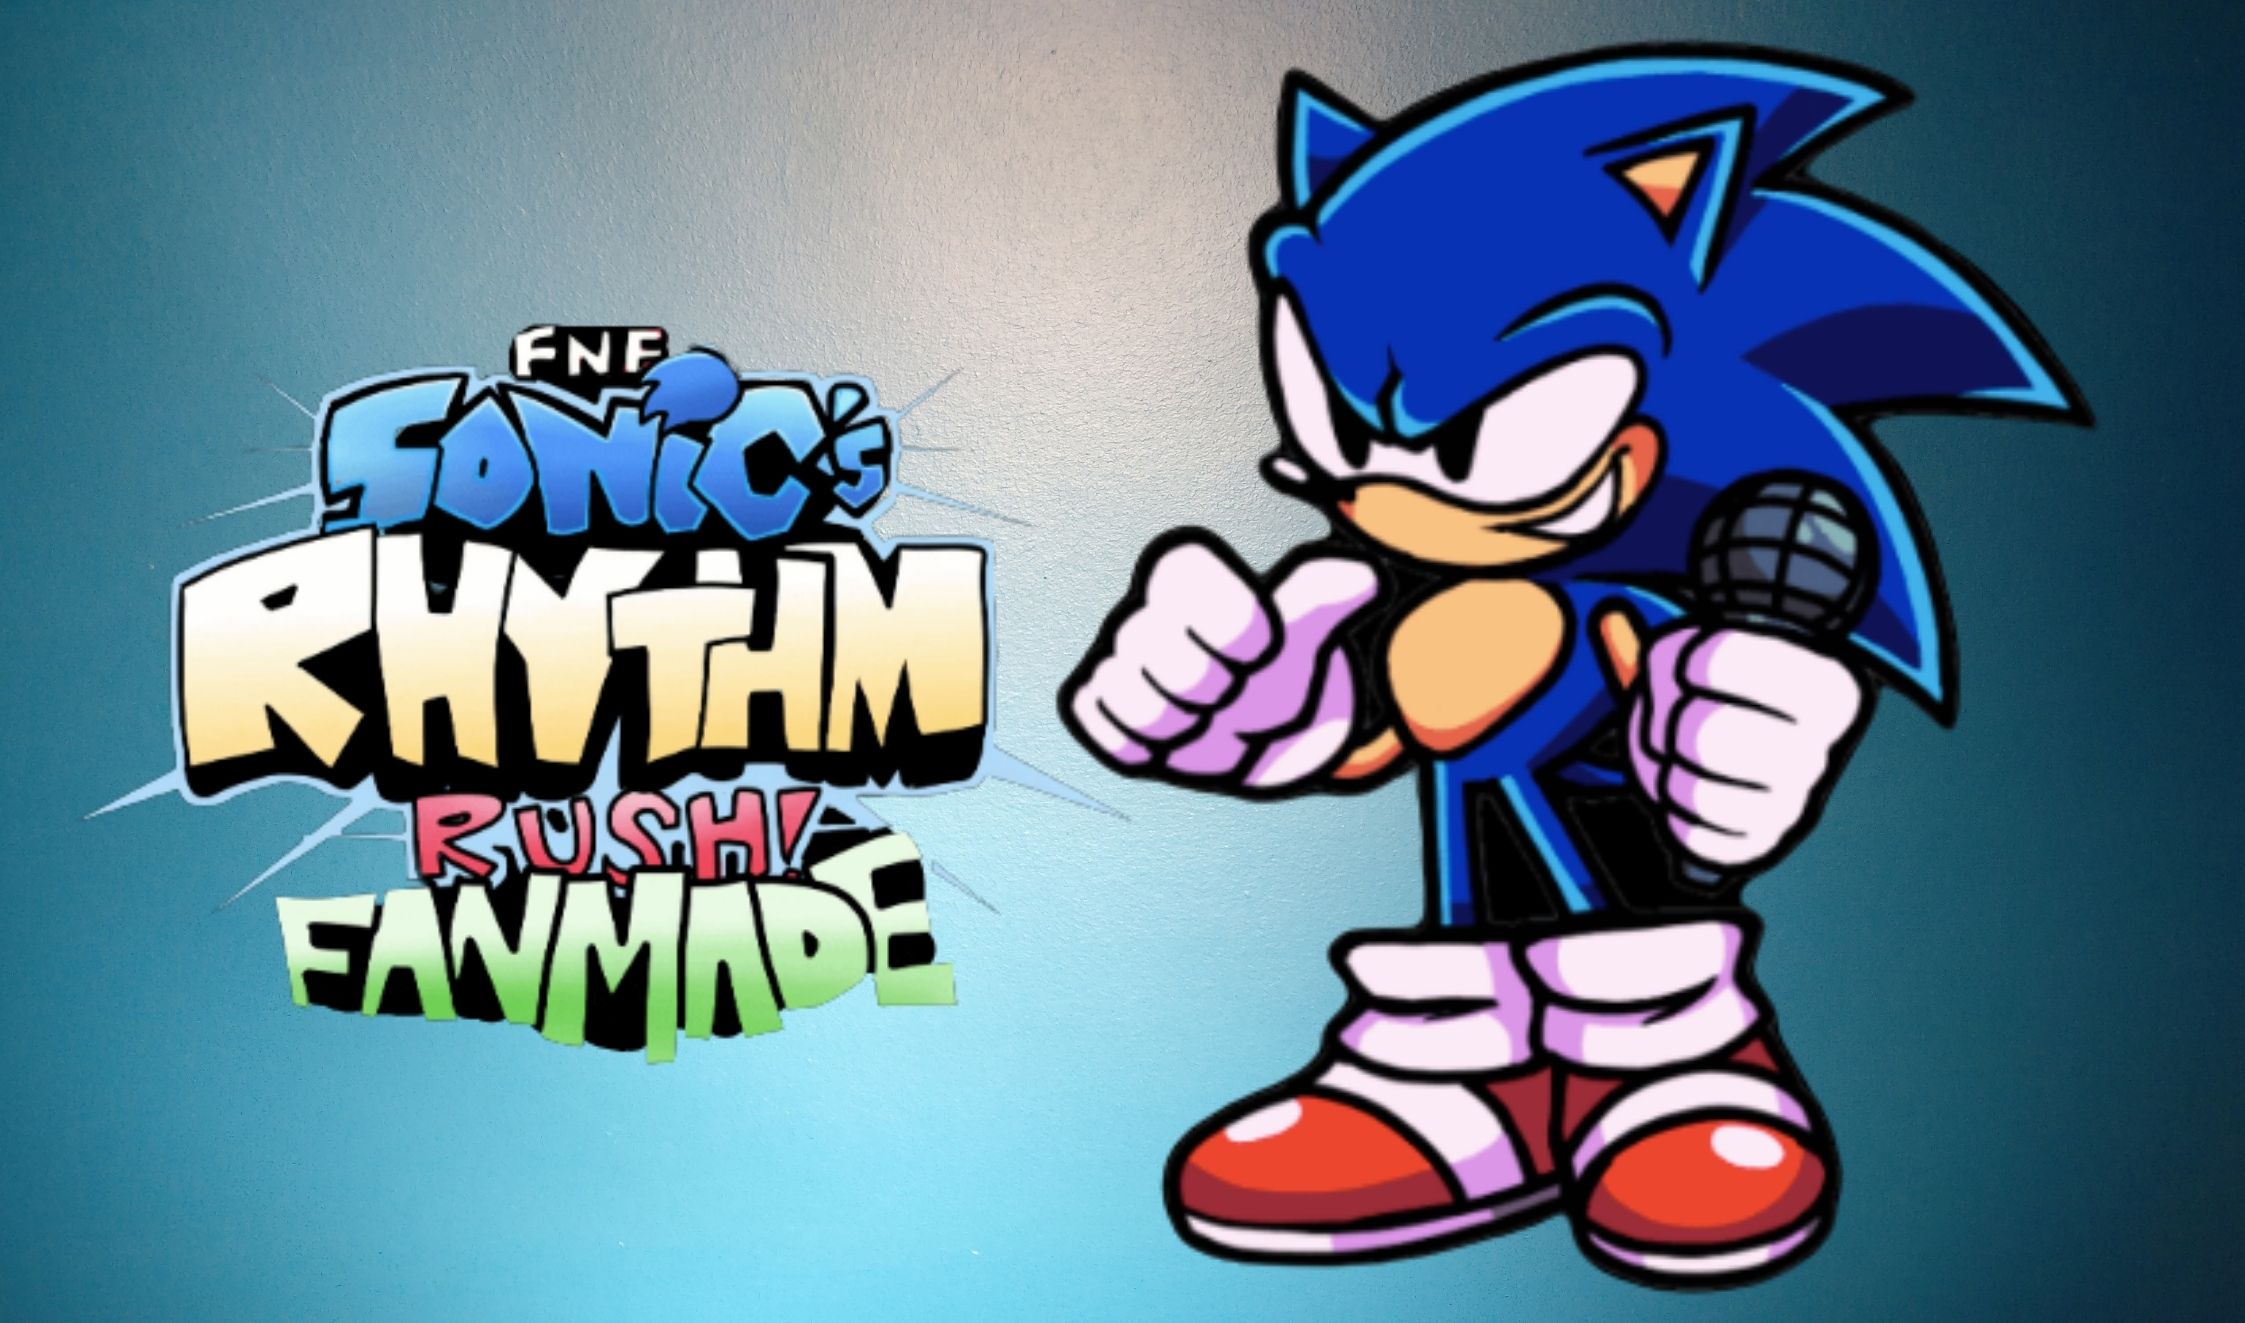 FNF, Vs Sonic.EXE 3.0 but i restored it! - FANMADE